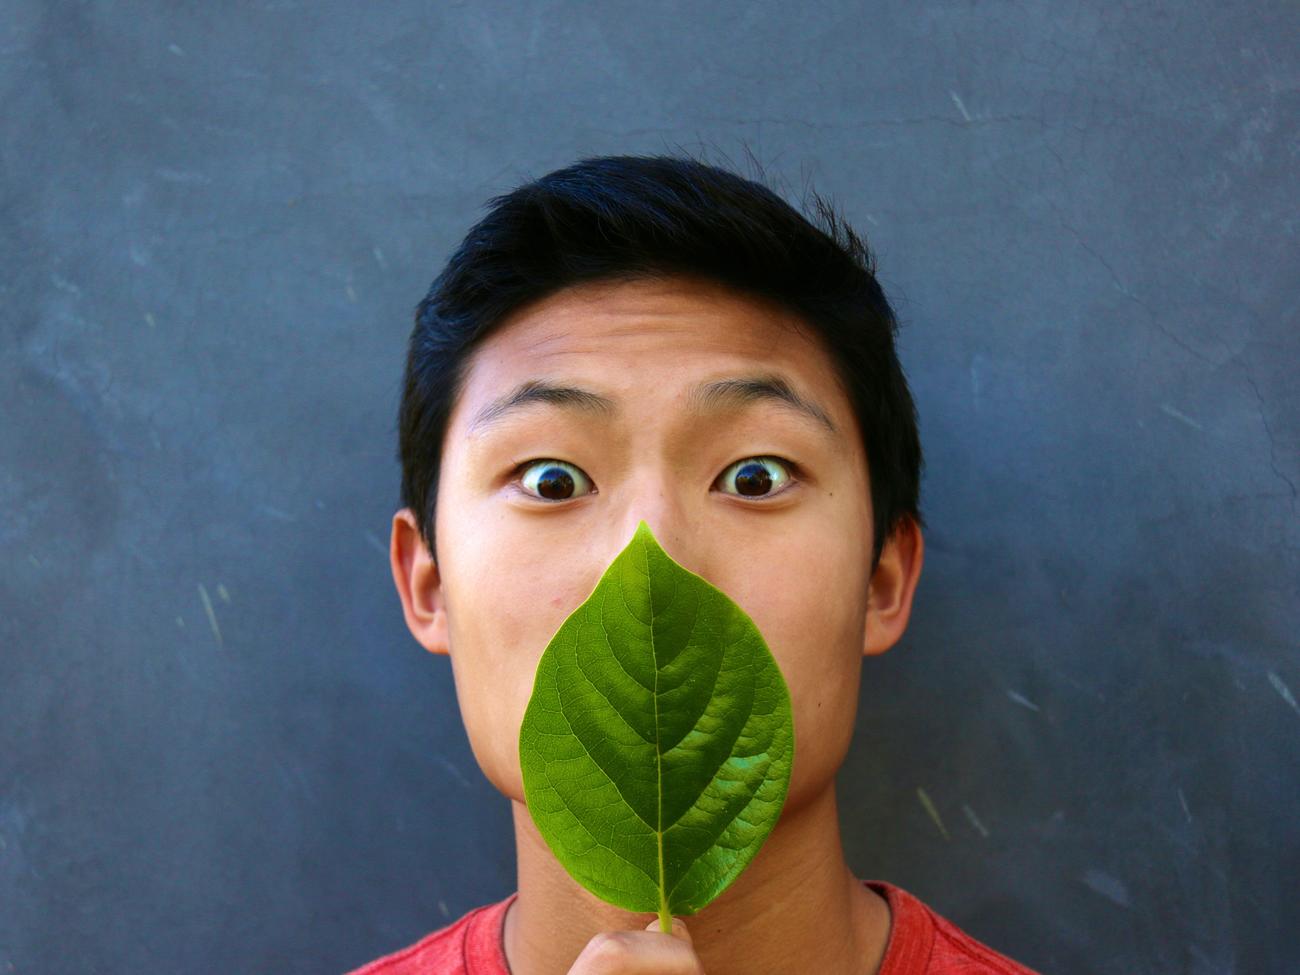 Confessions of a high school phytophile